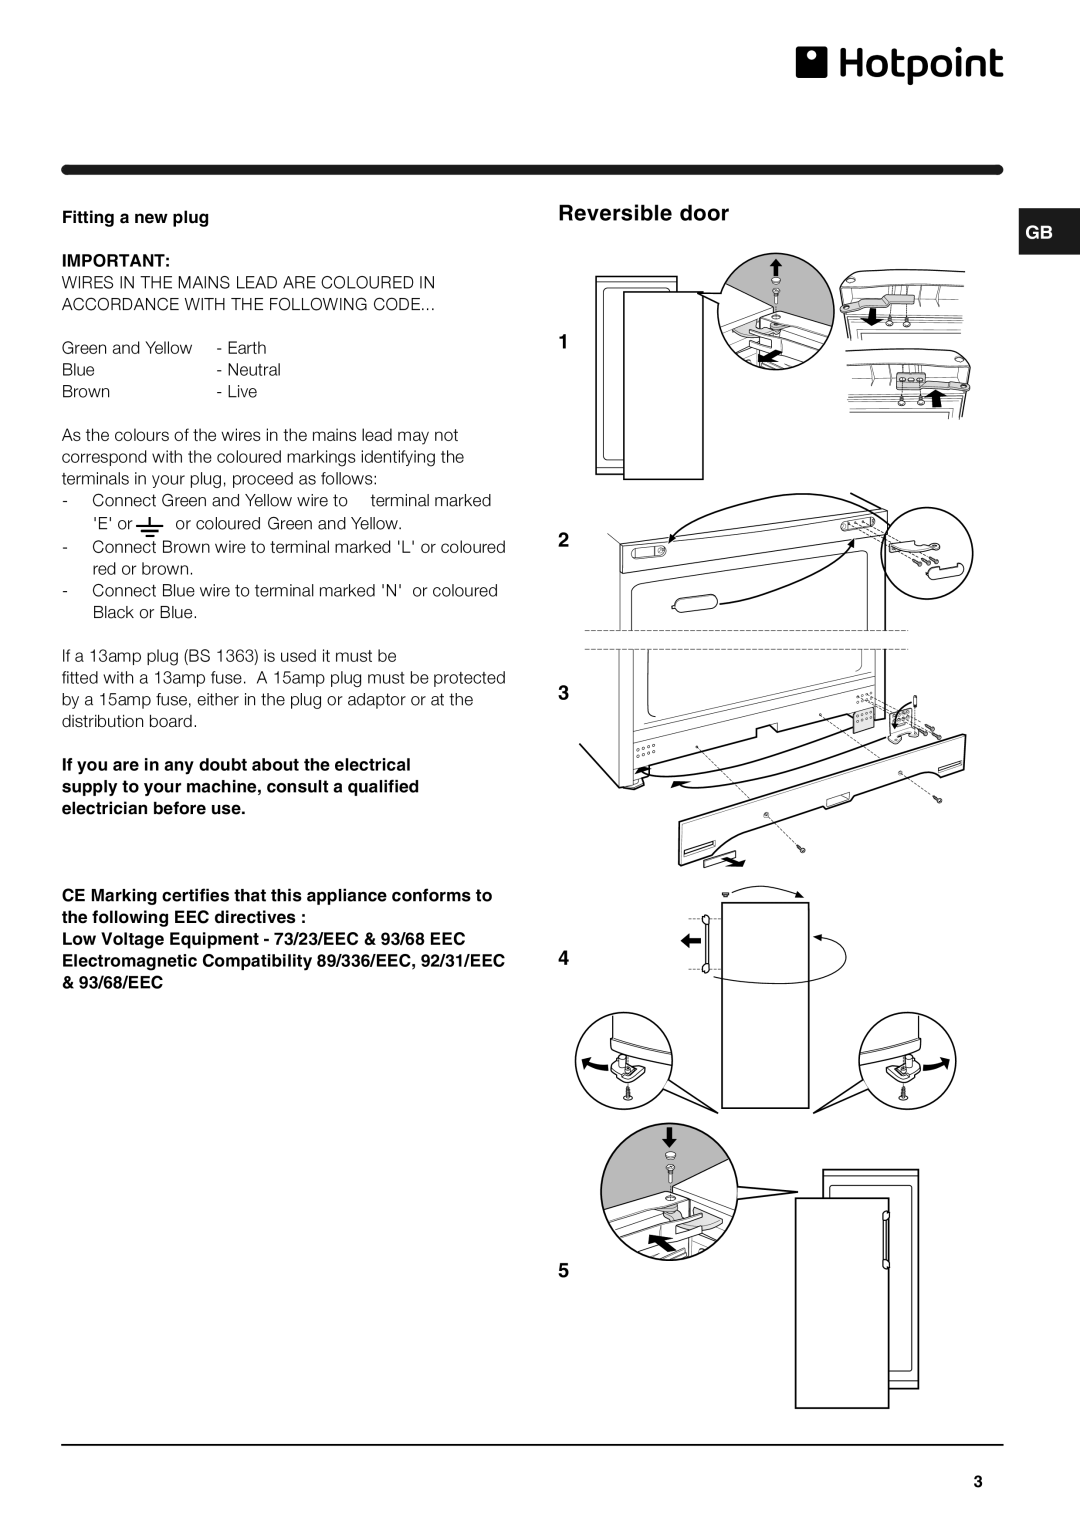 Hotpoint RLA175P operating instructions Reversible door, Fitting a new plug 